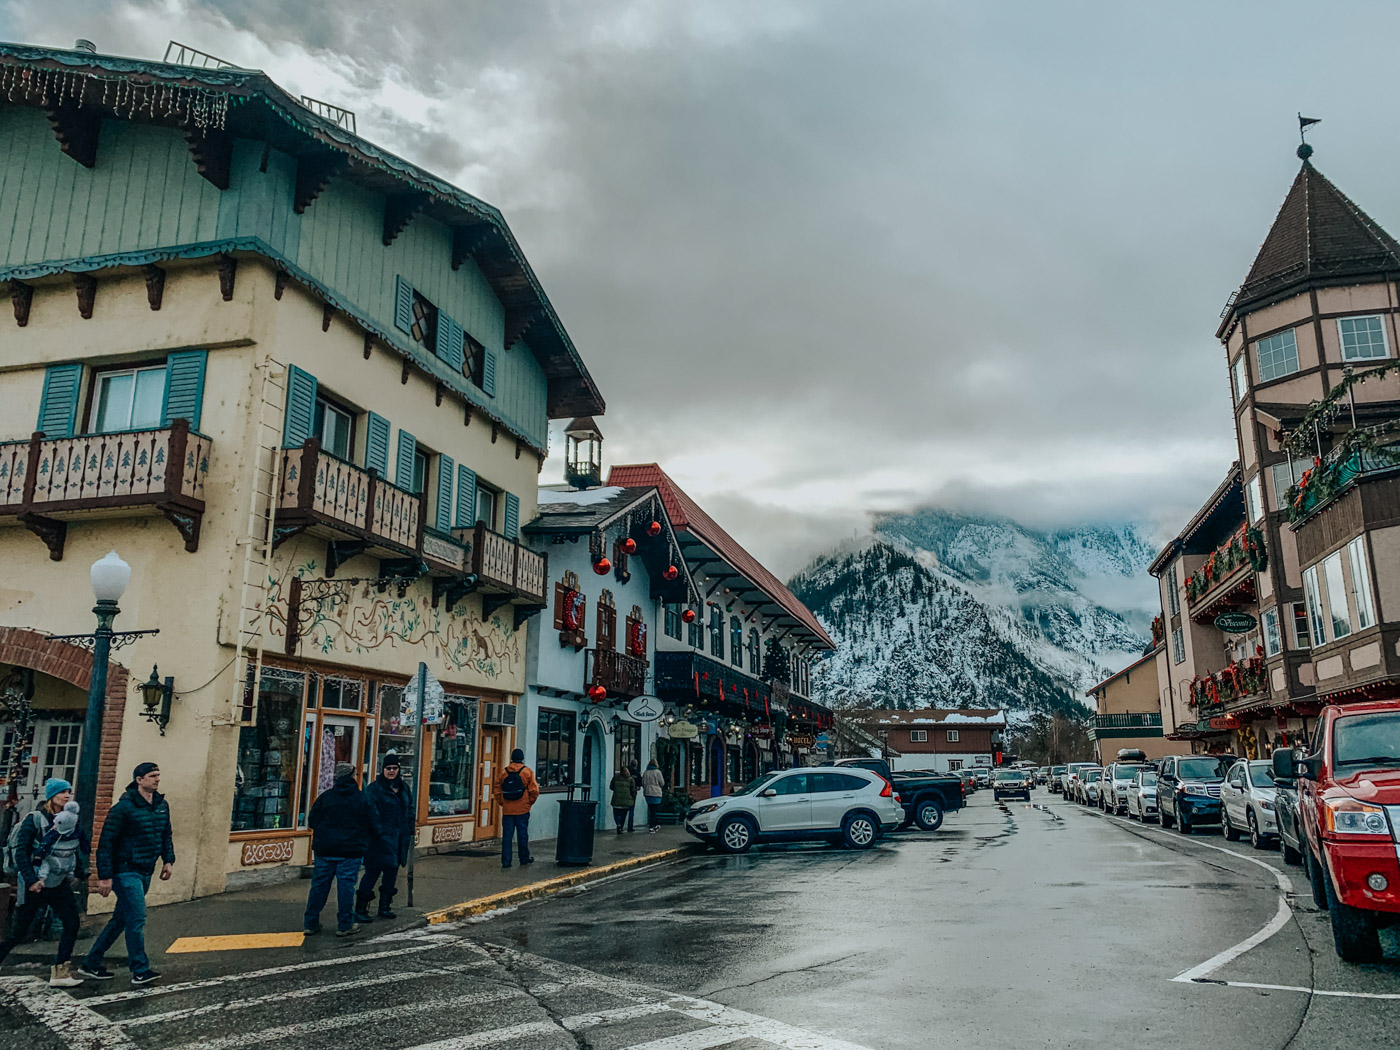 Fun Things to Do in Leavenworth WA in the Winter: a Complete Weekend Travel Guide featured by top US travel blog, Lone Star Looking Glass.